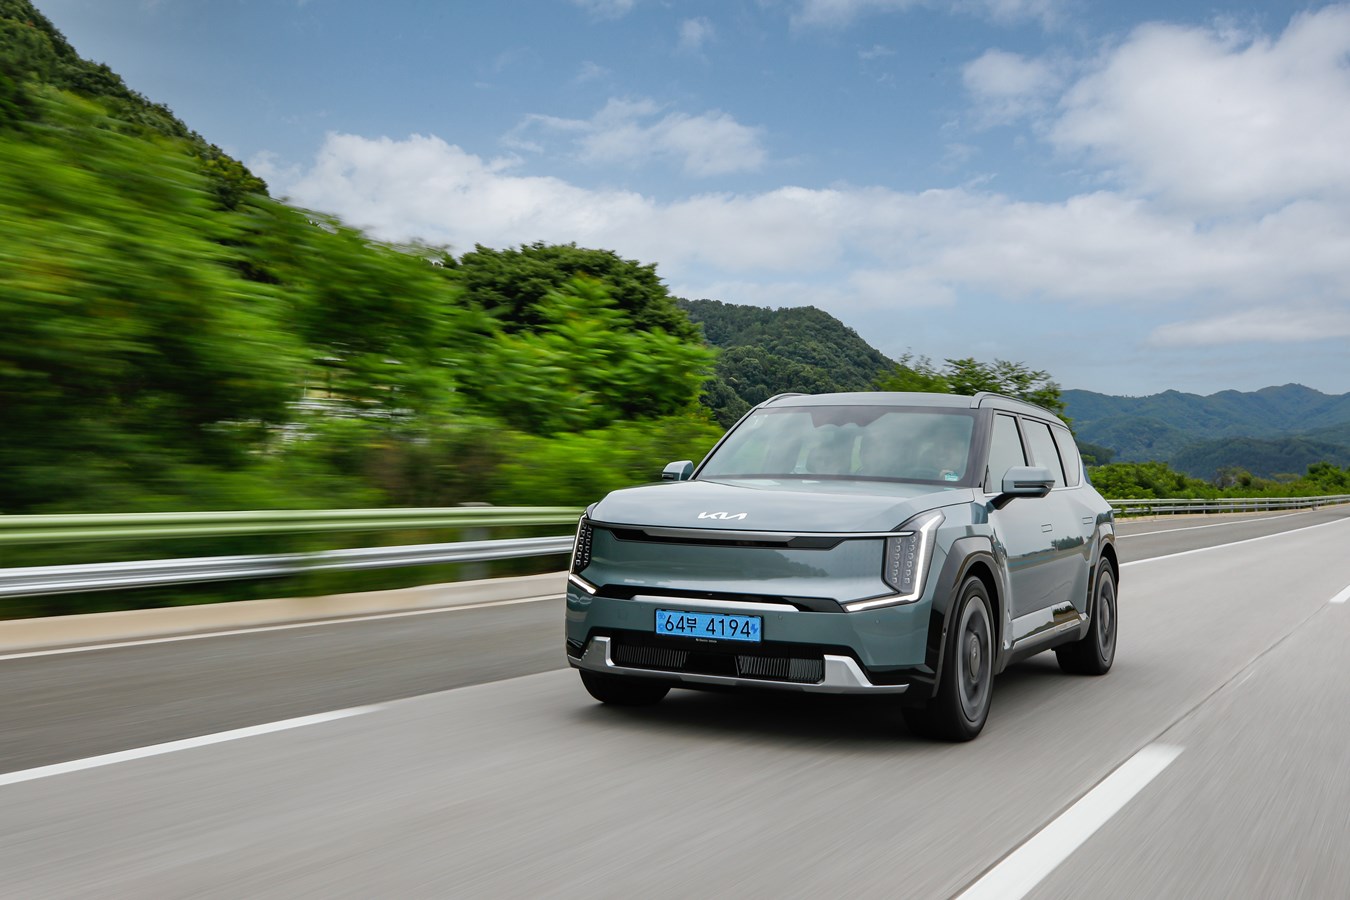 Kia's EV9 electric SUV brings space comfort and adventure to every journey